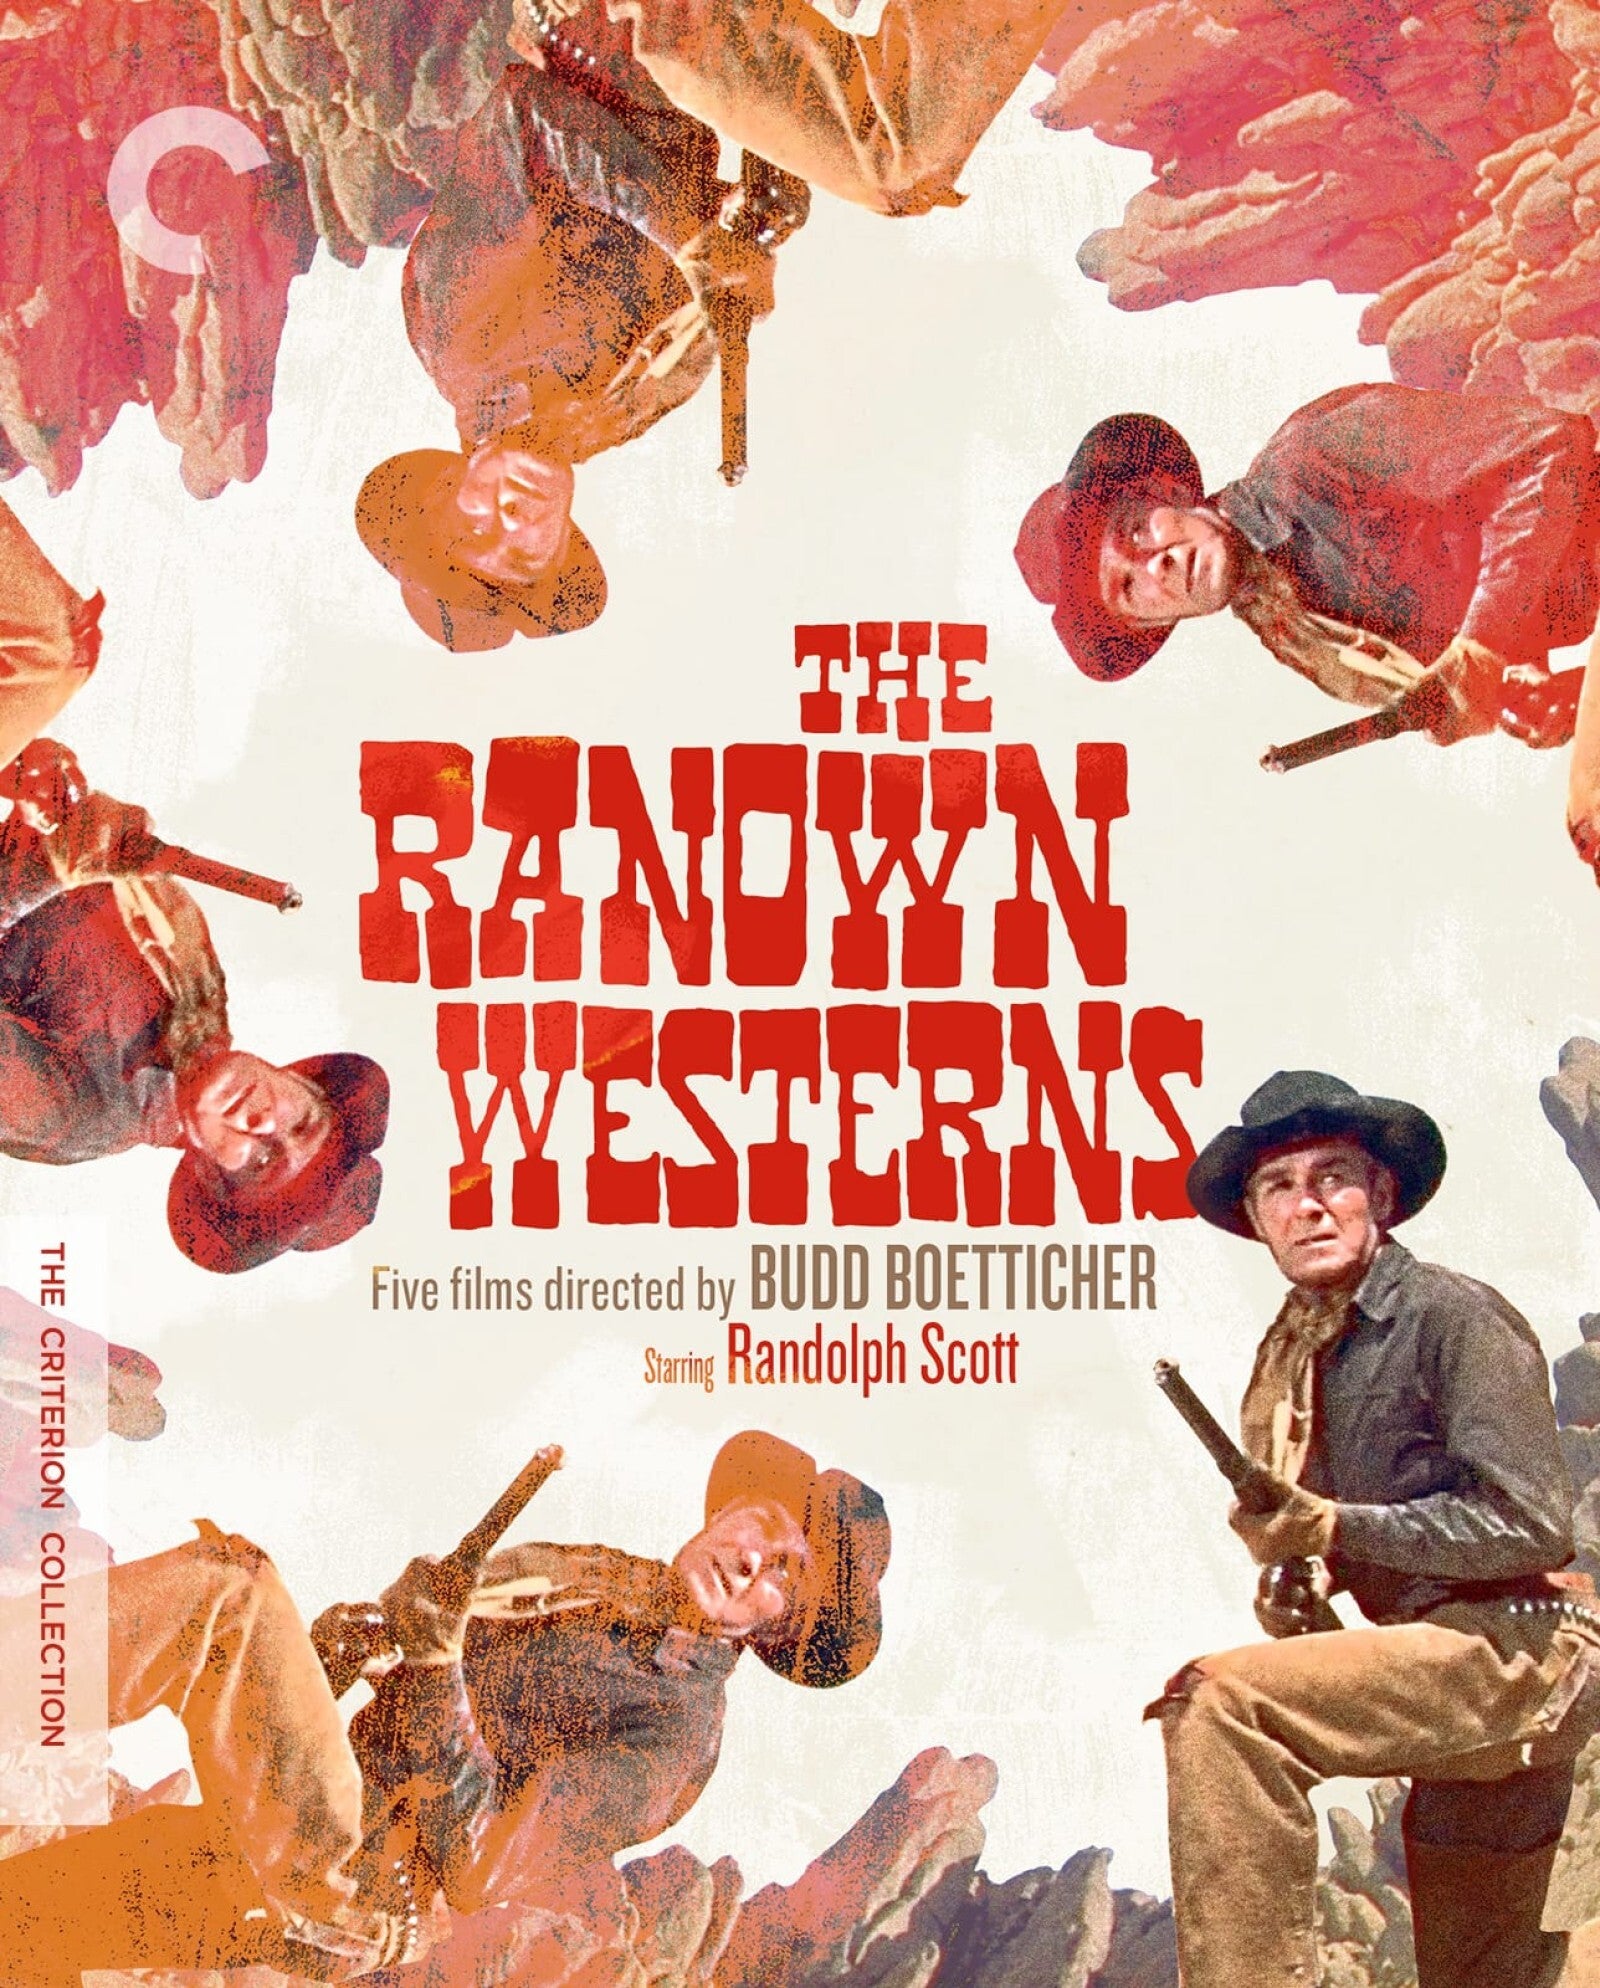 THE RANOWN WESTERSN: FIVE FILMS DIRECTED BY BUDD BOETTICHER 4K UHD/BLU-RAY